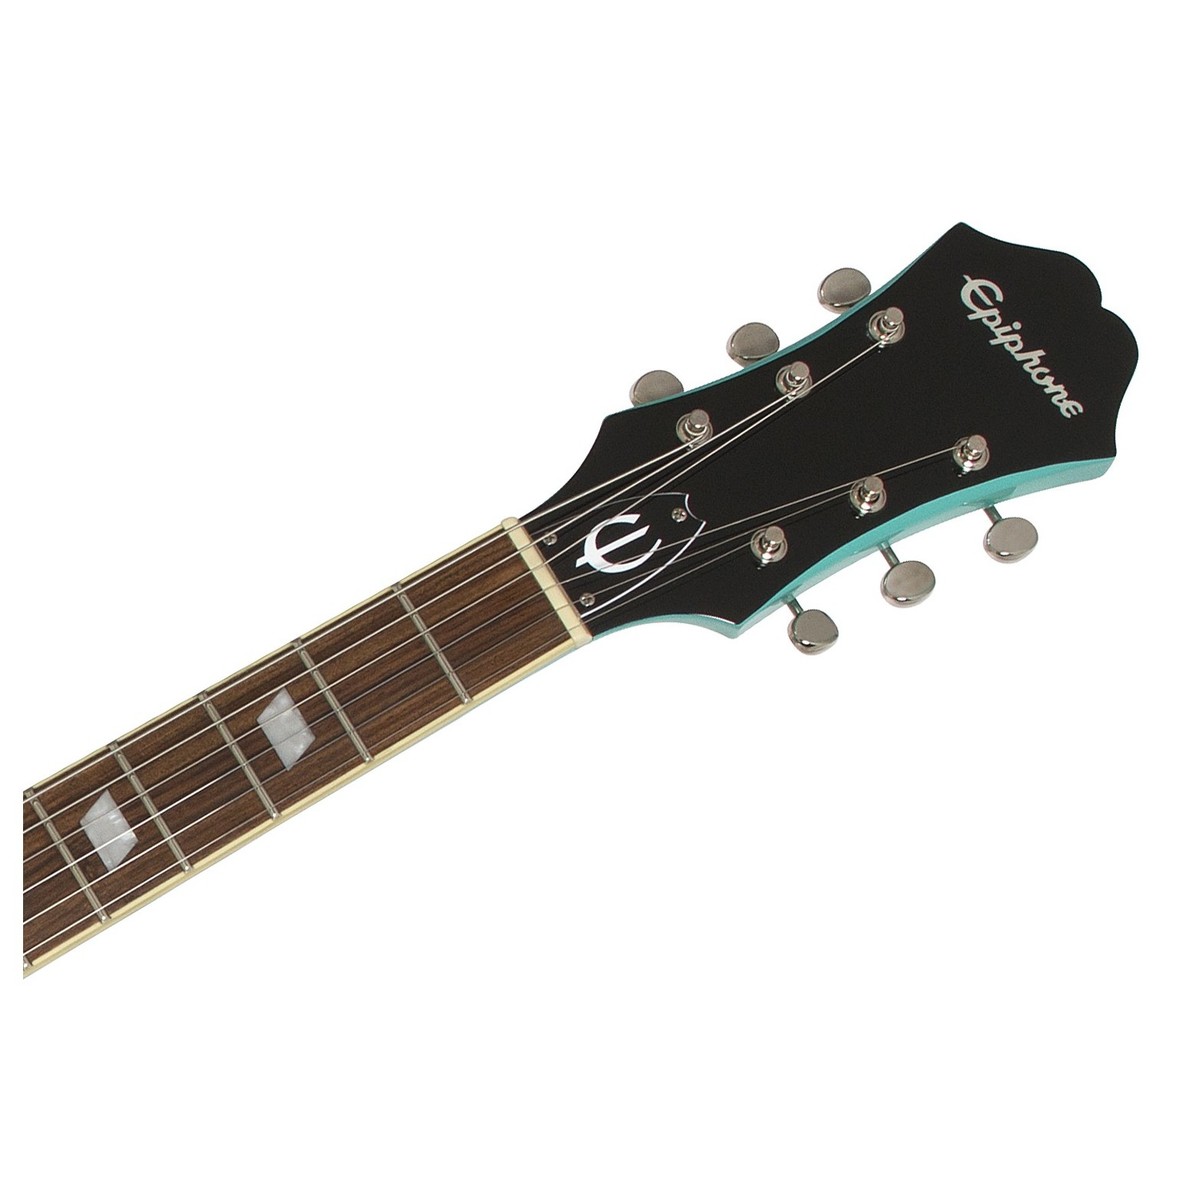 Epiphone Casino Coupe Archtop 2019 2p90 Ht Pf - Turquoise - Semi-Hollow E-Gitarre - Variation 2